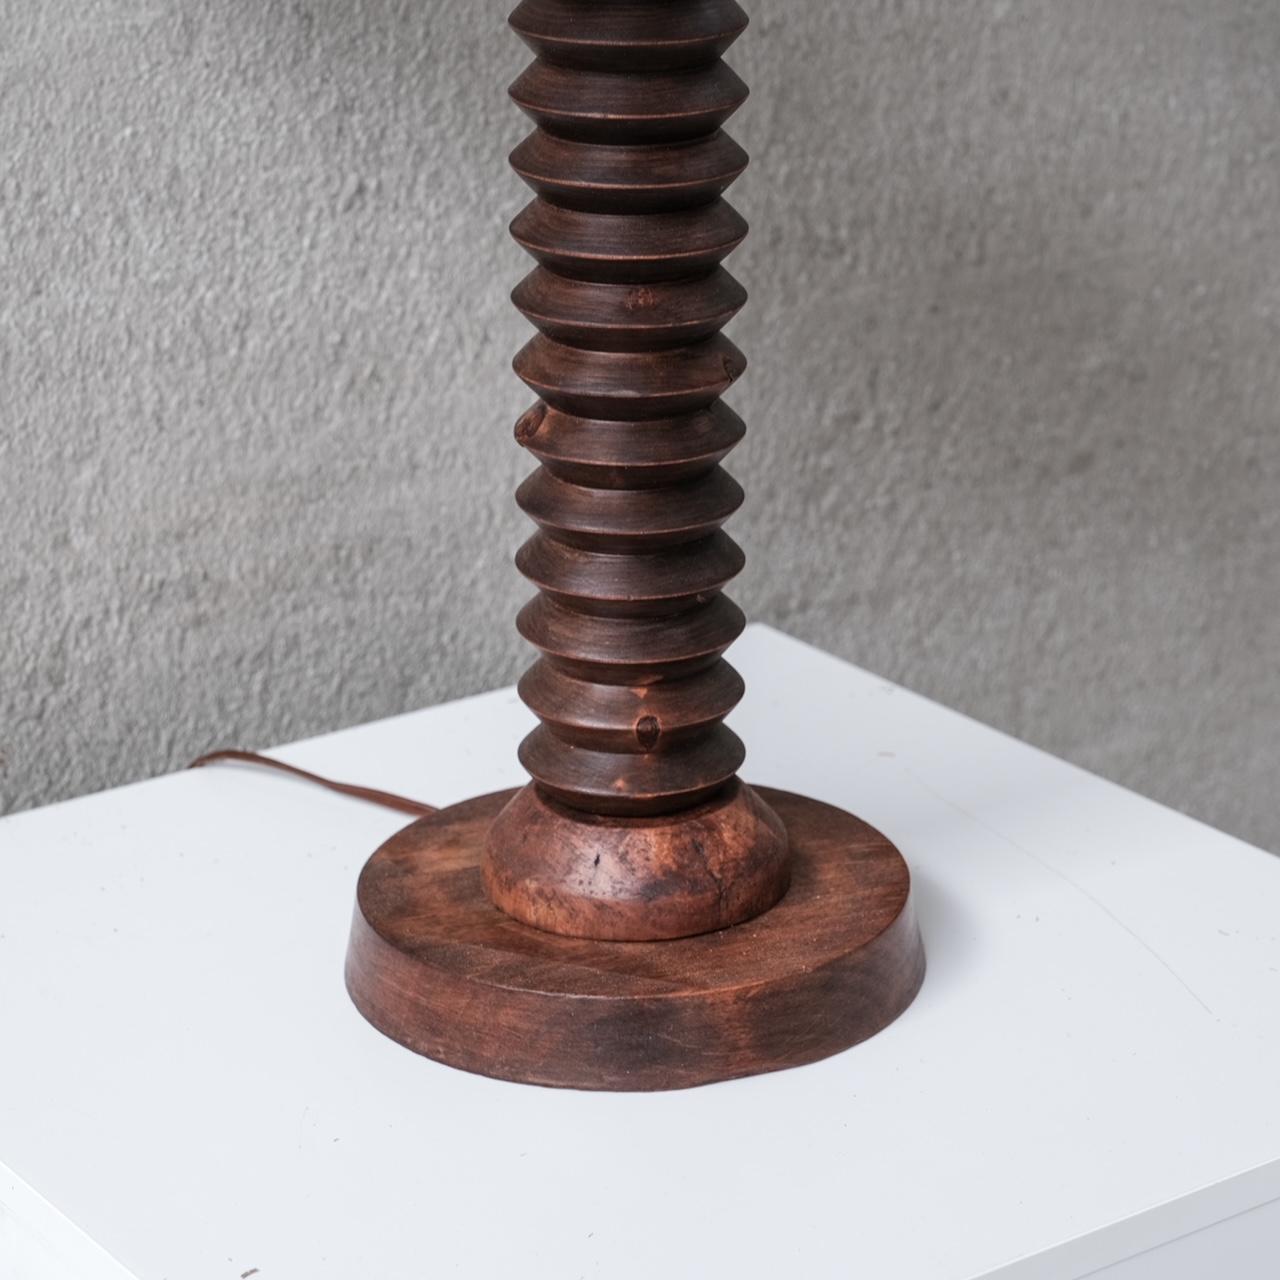 A turned oak table lamp.

France, c1940s.

Paired with a new shade.

Since re-wired and PAT tested.

Good vintage condition, some nicks and wear commensurate with age.

Location: Belgium Gallery.

Dimensions: 59 H x 35 Diameter in cm.

Delivery: